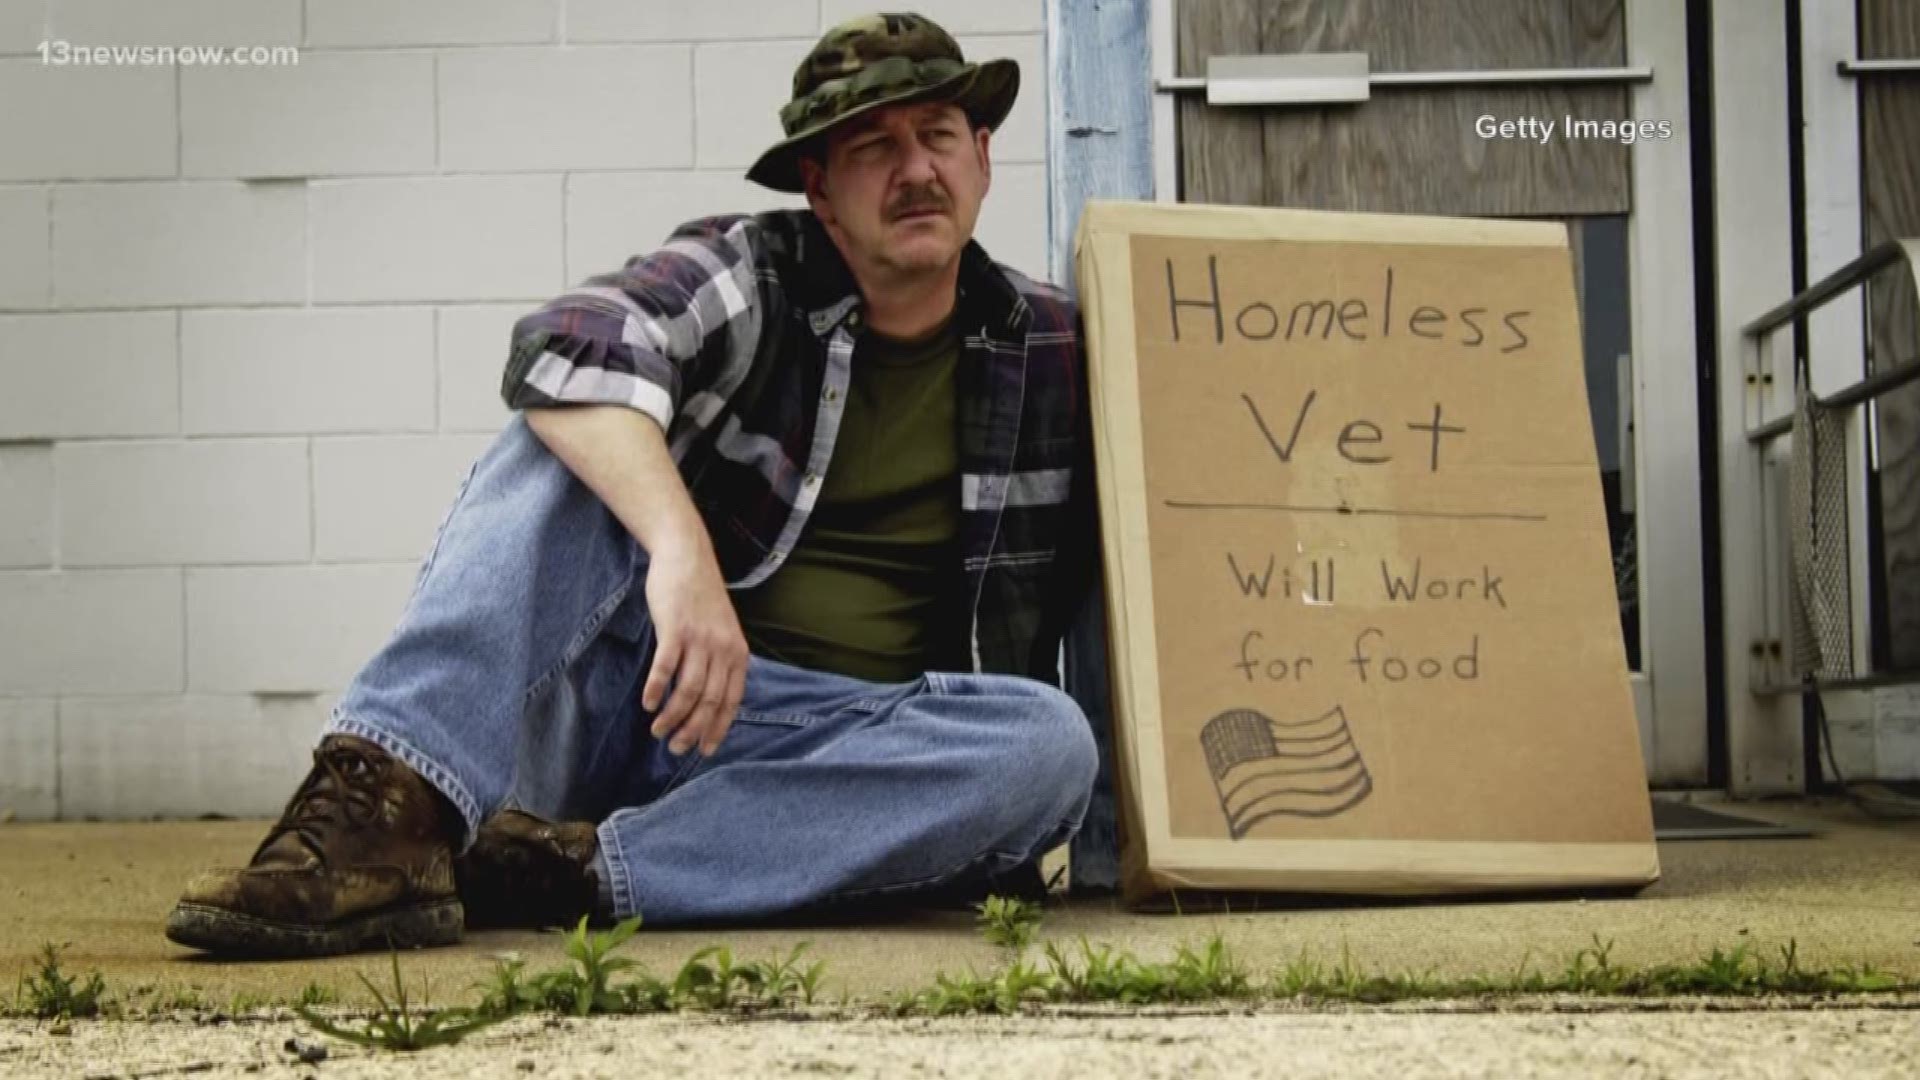 Progress made on veterans' homelessness since 2010, much more is needed